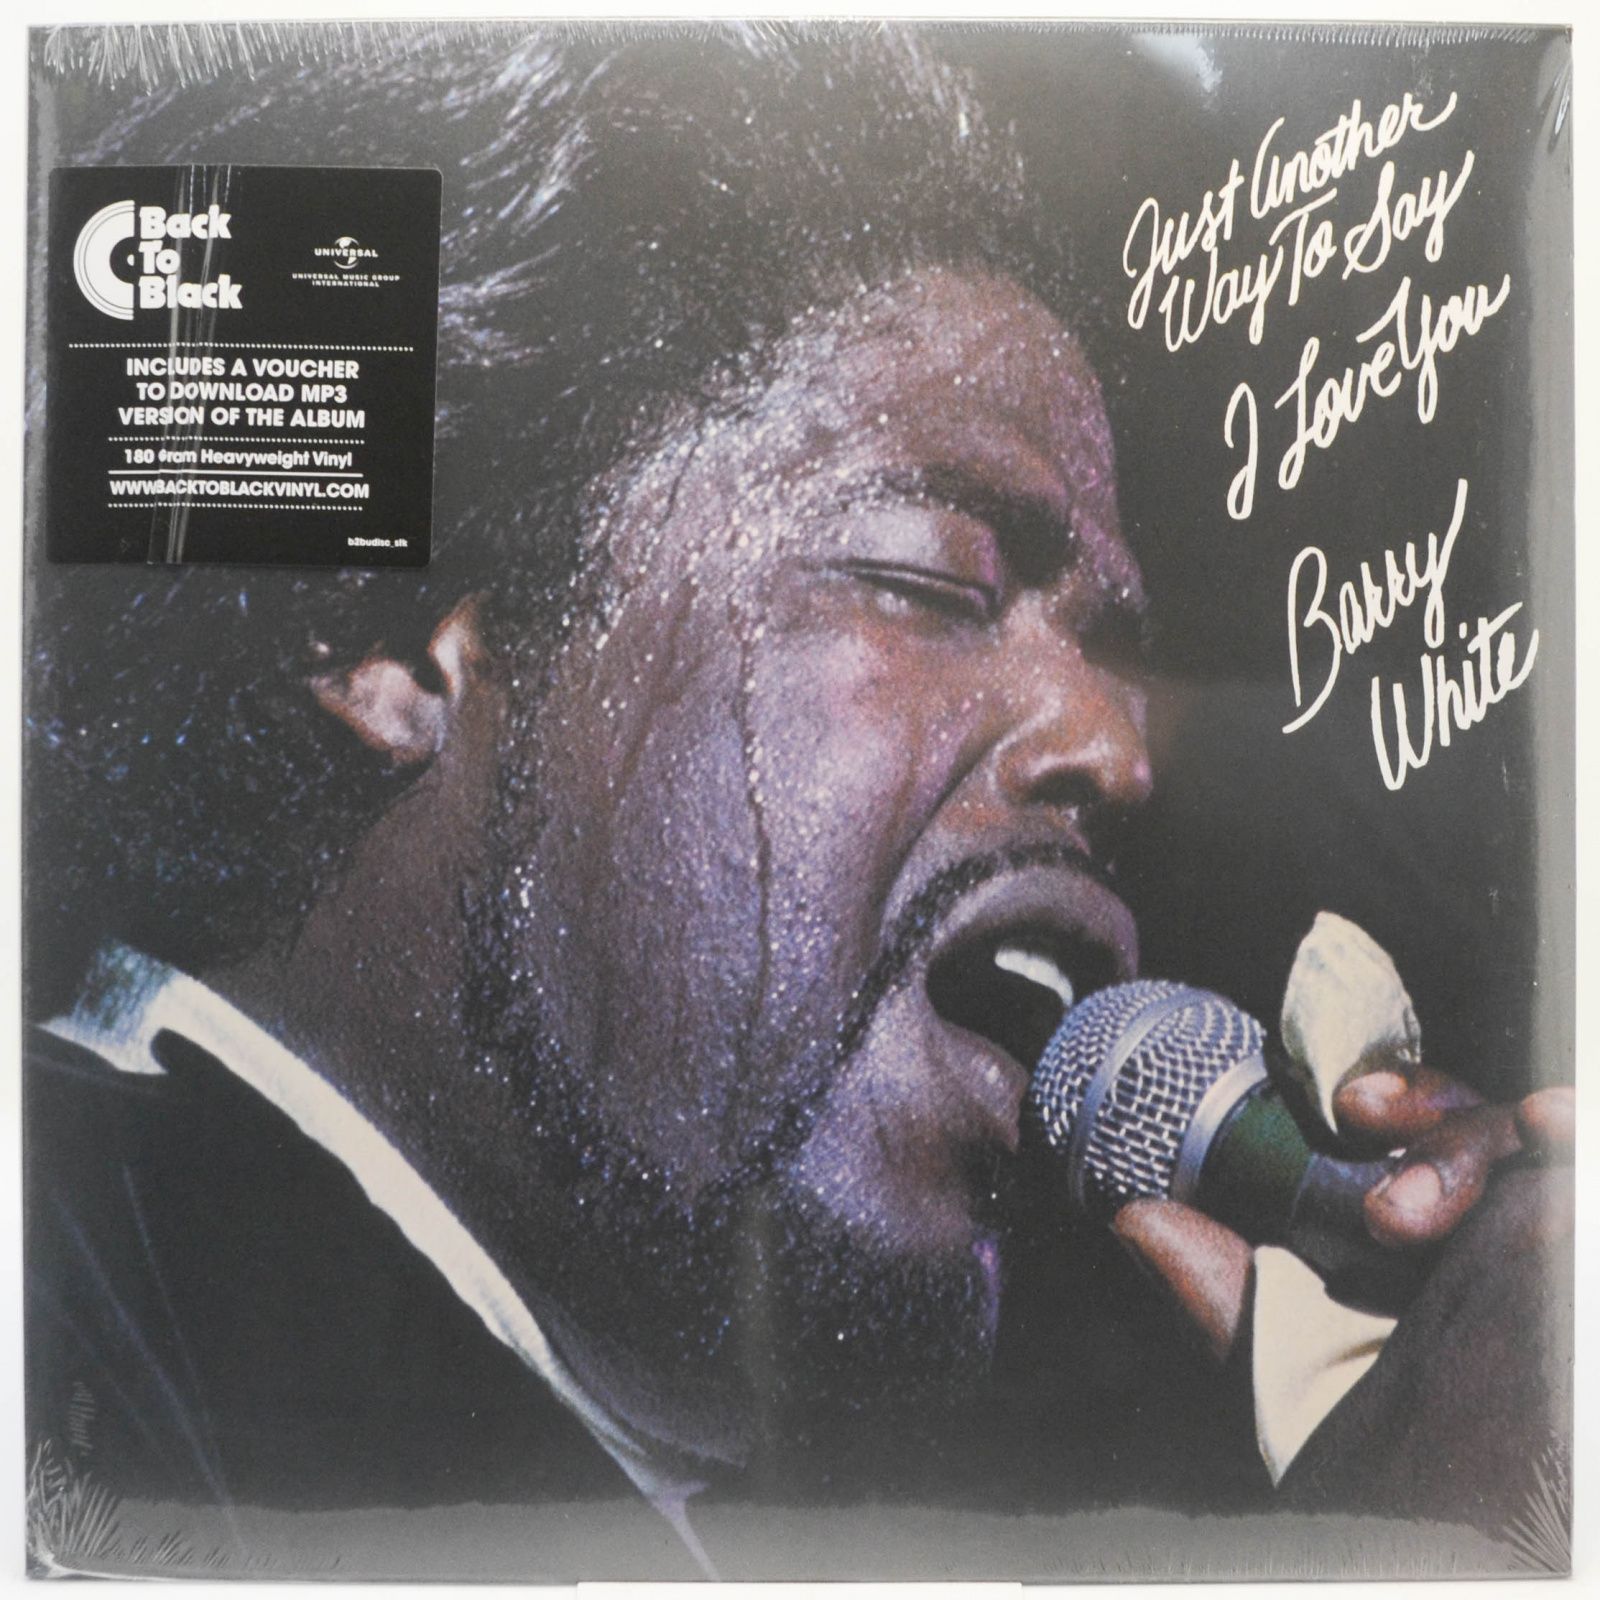 Barry White — Just Another Way To Say I Love You, 2018